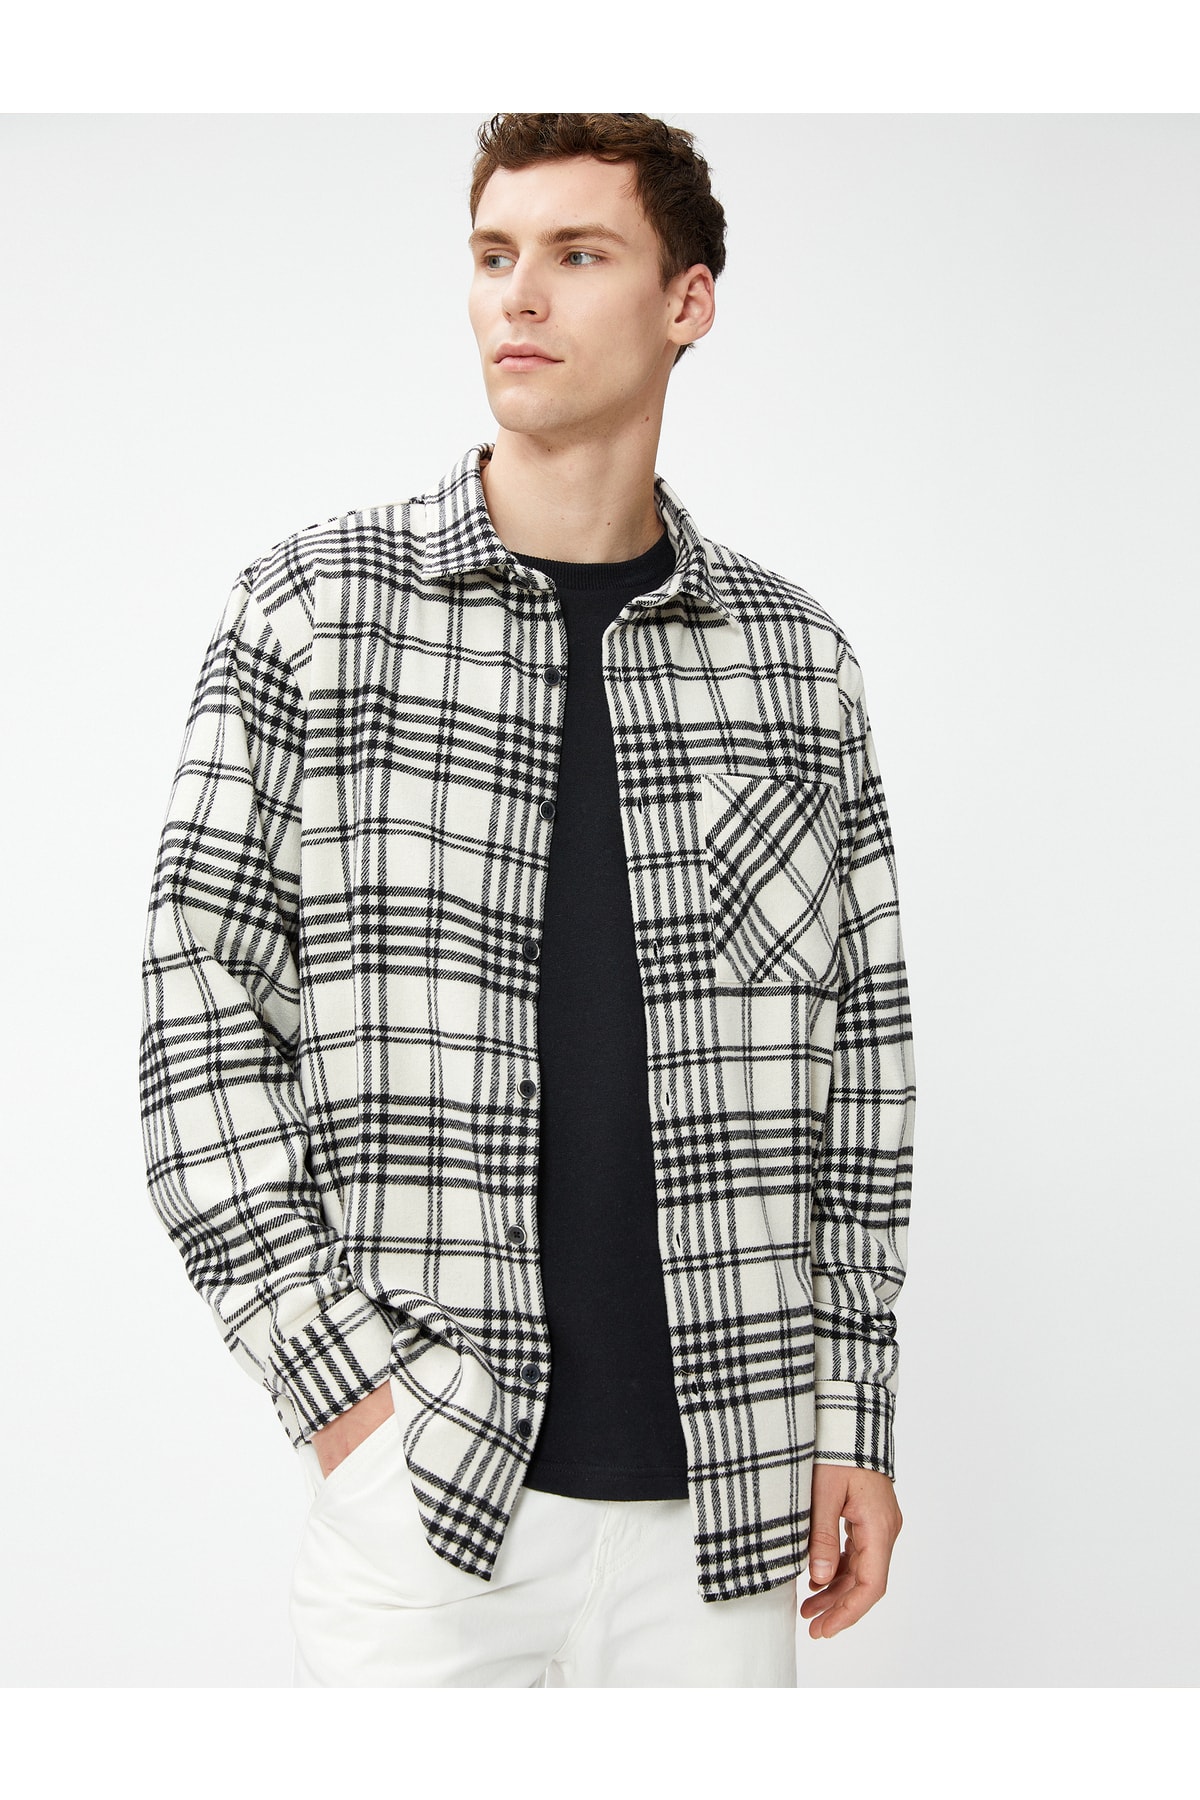 Levně Koton Lumberjack Shirt with a Classic Collar, Pocket Detailed and Long Sleeves.